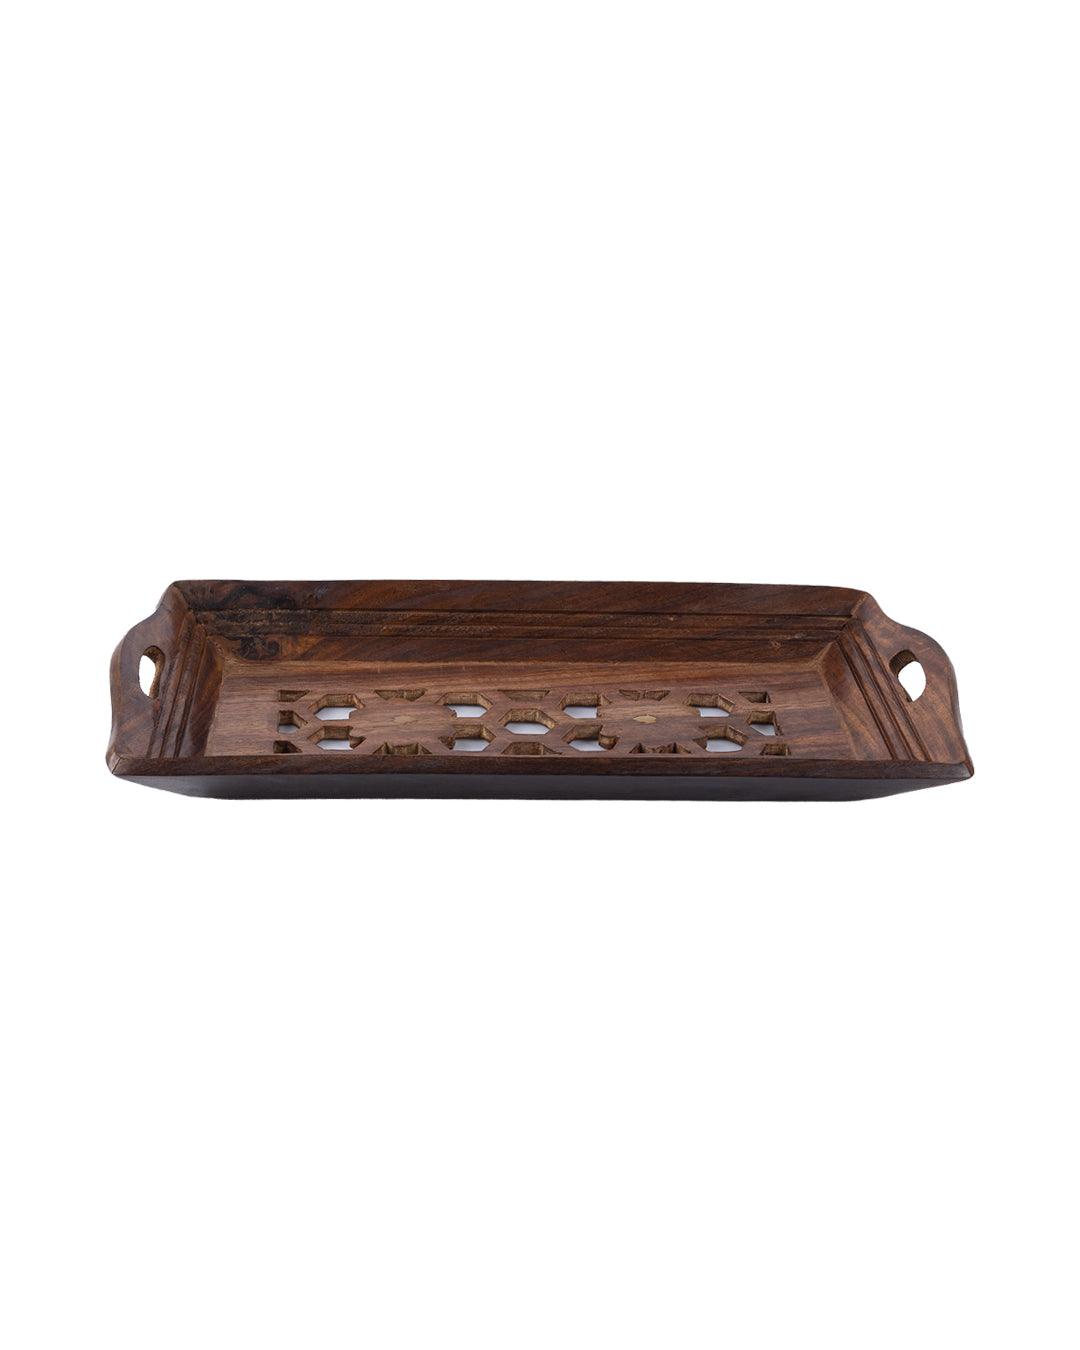 Sheesham Wood Handcrafts Coffee Serving Tray with Handles